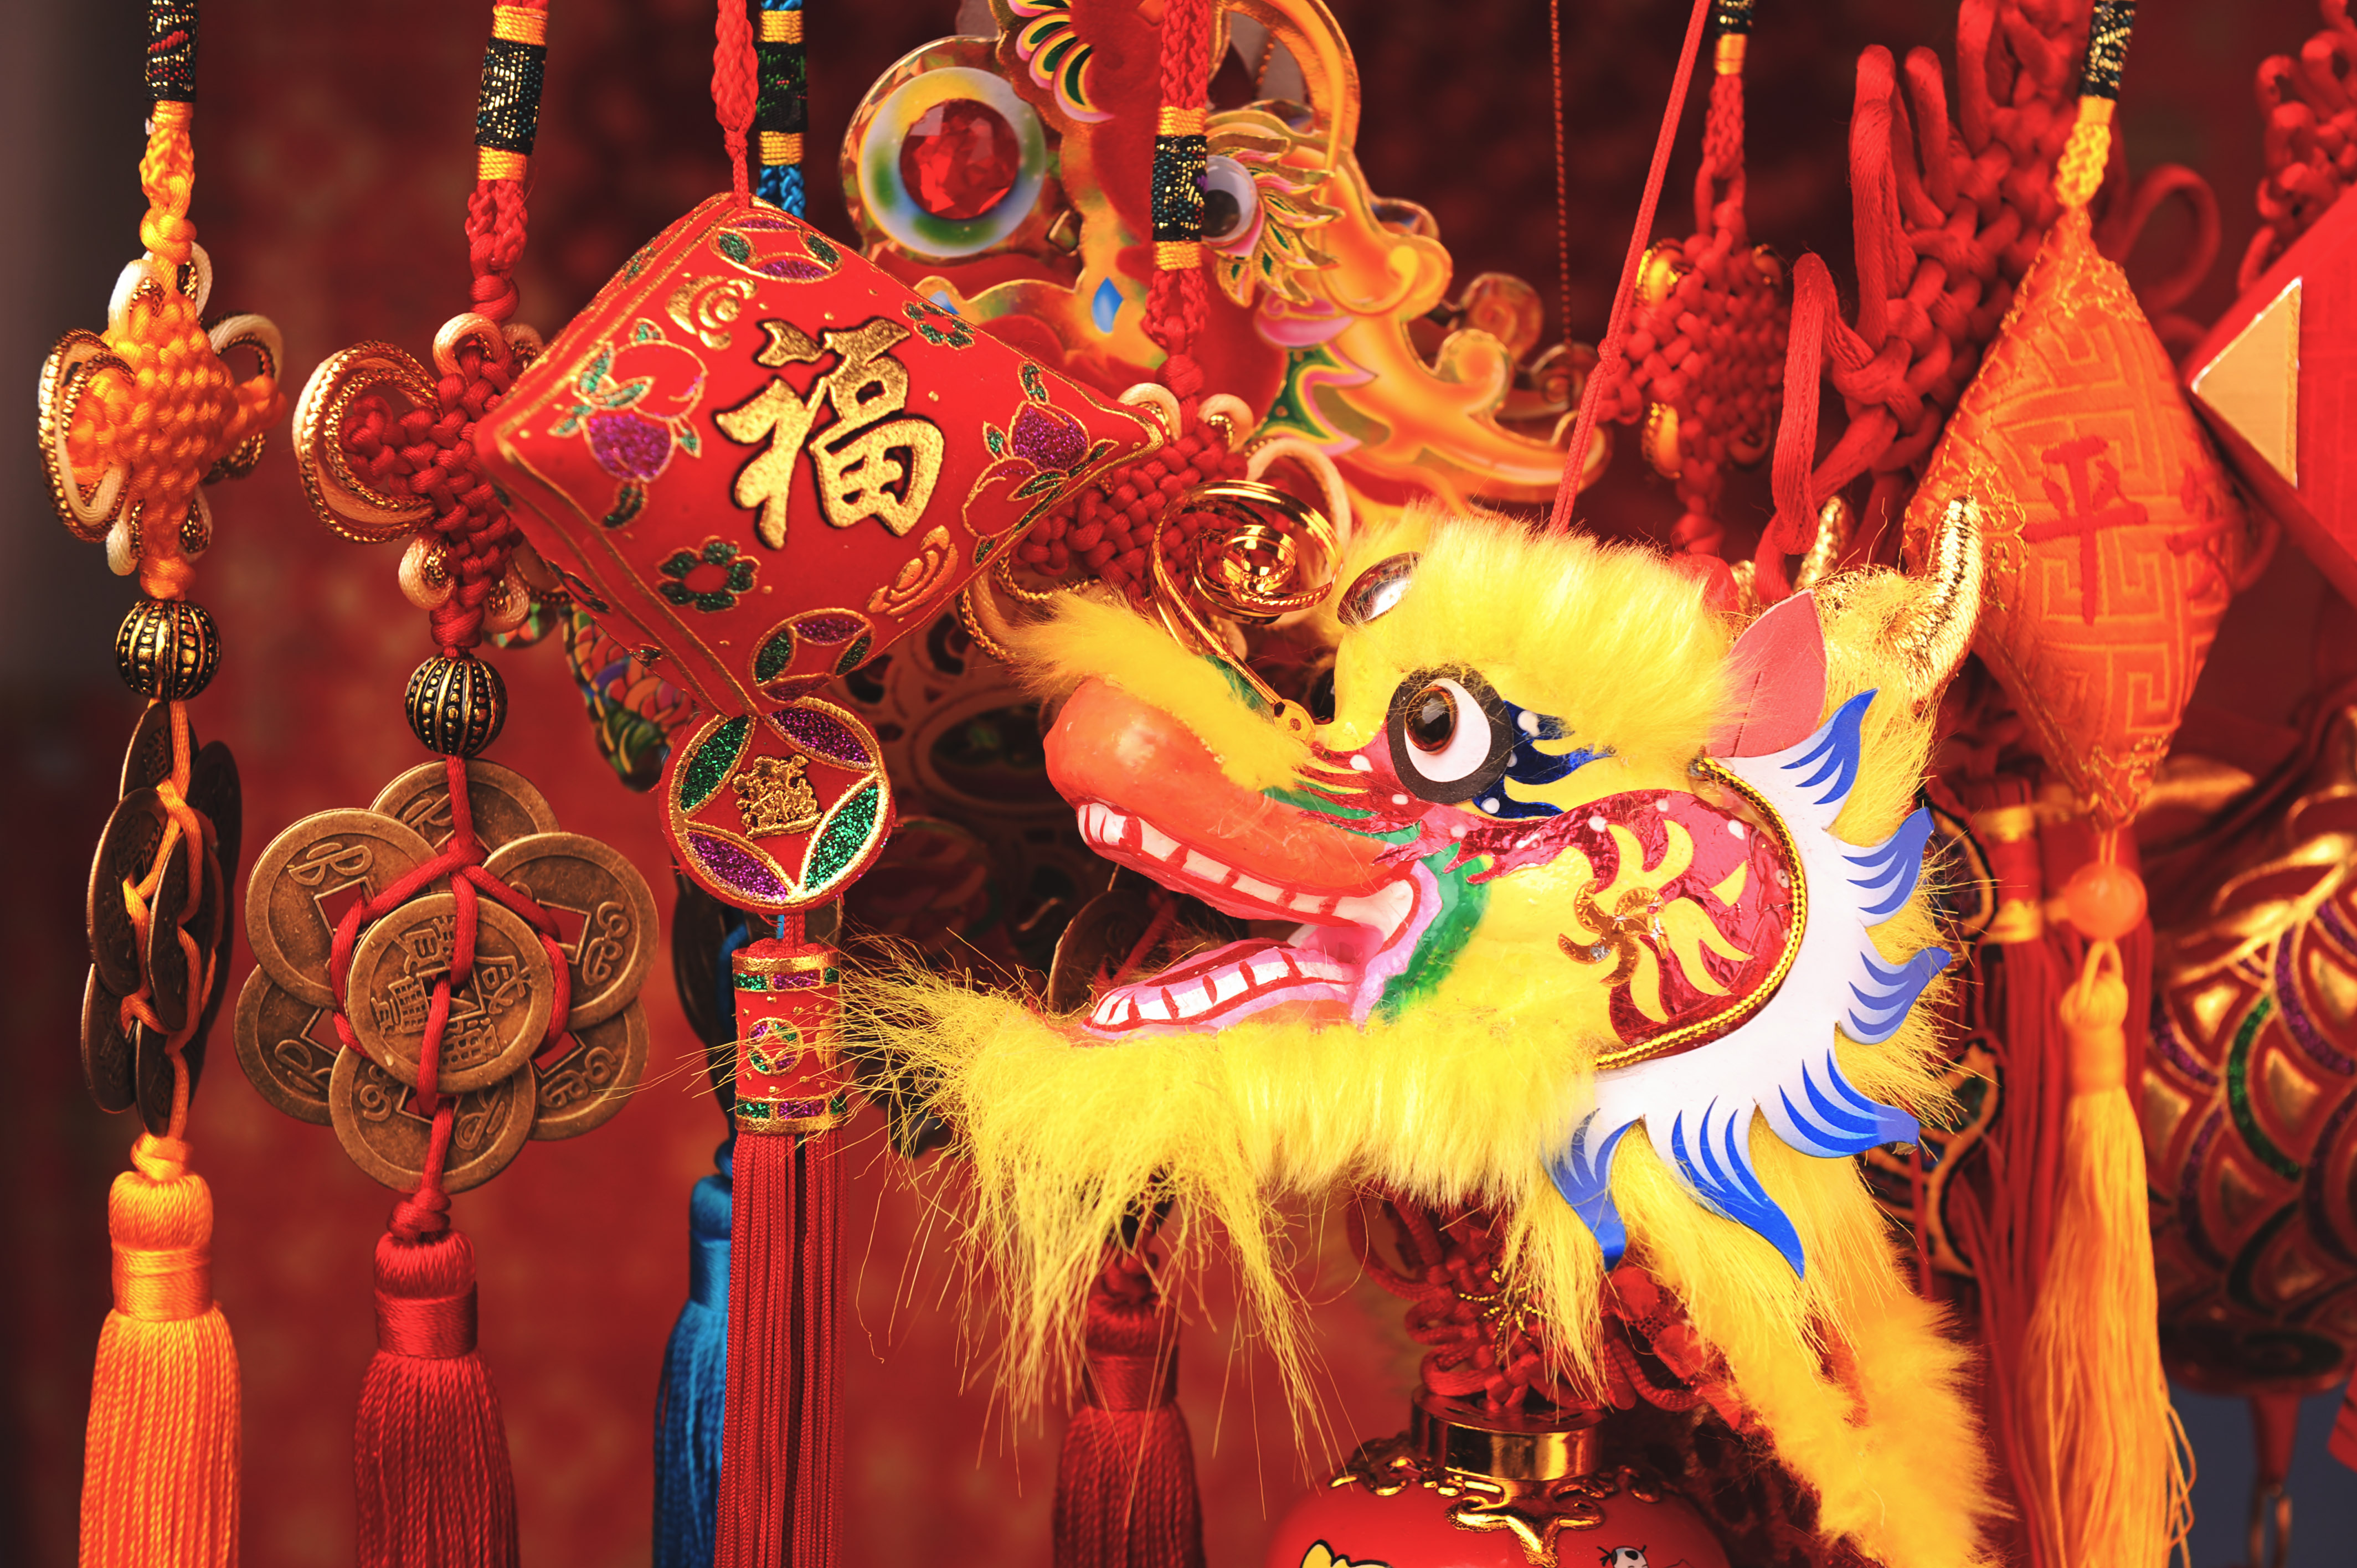 6 Unspoken Chinese New Year Gift Giving Etiquette Rules